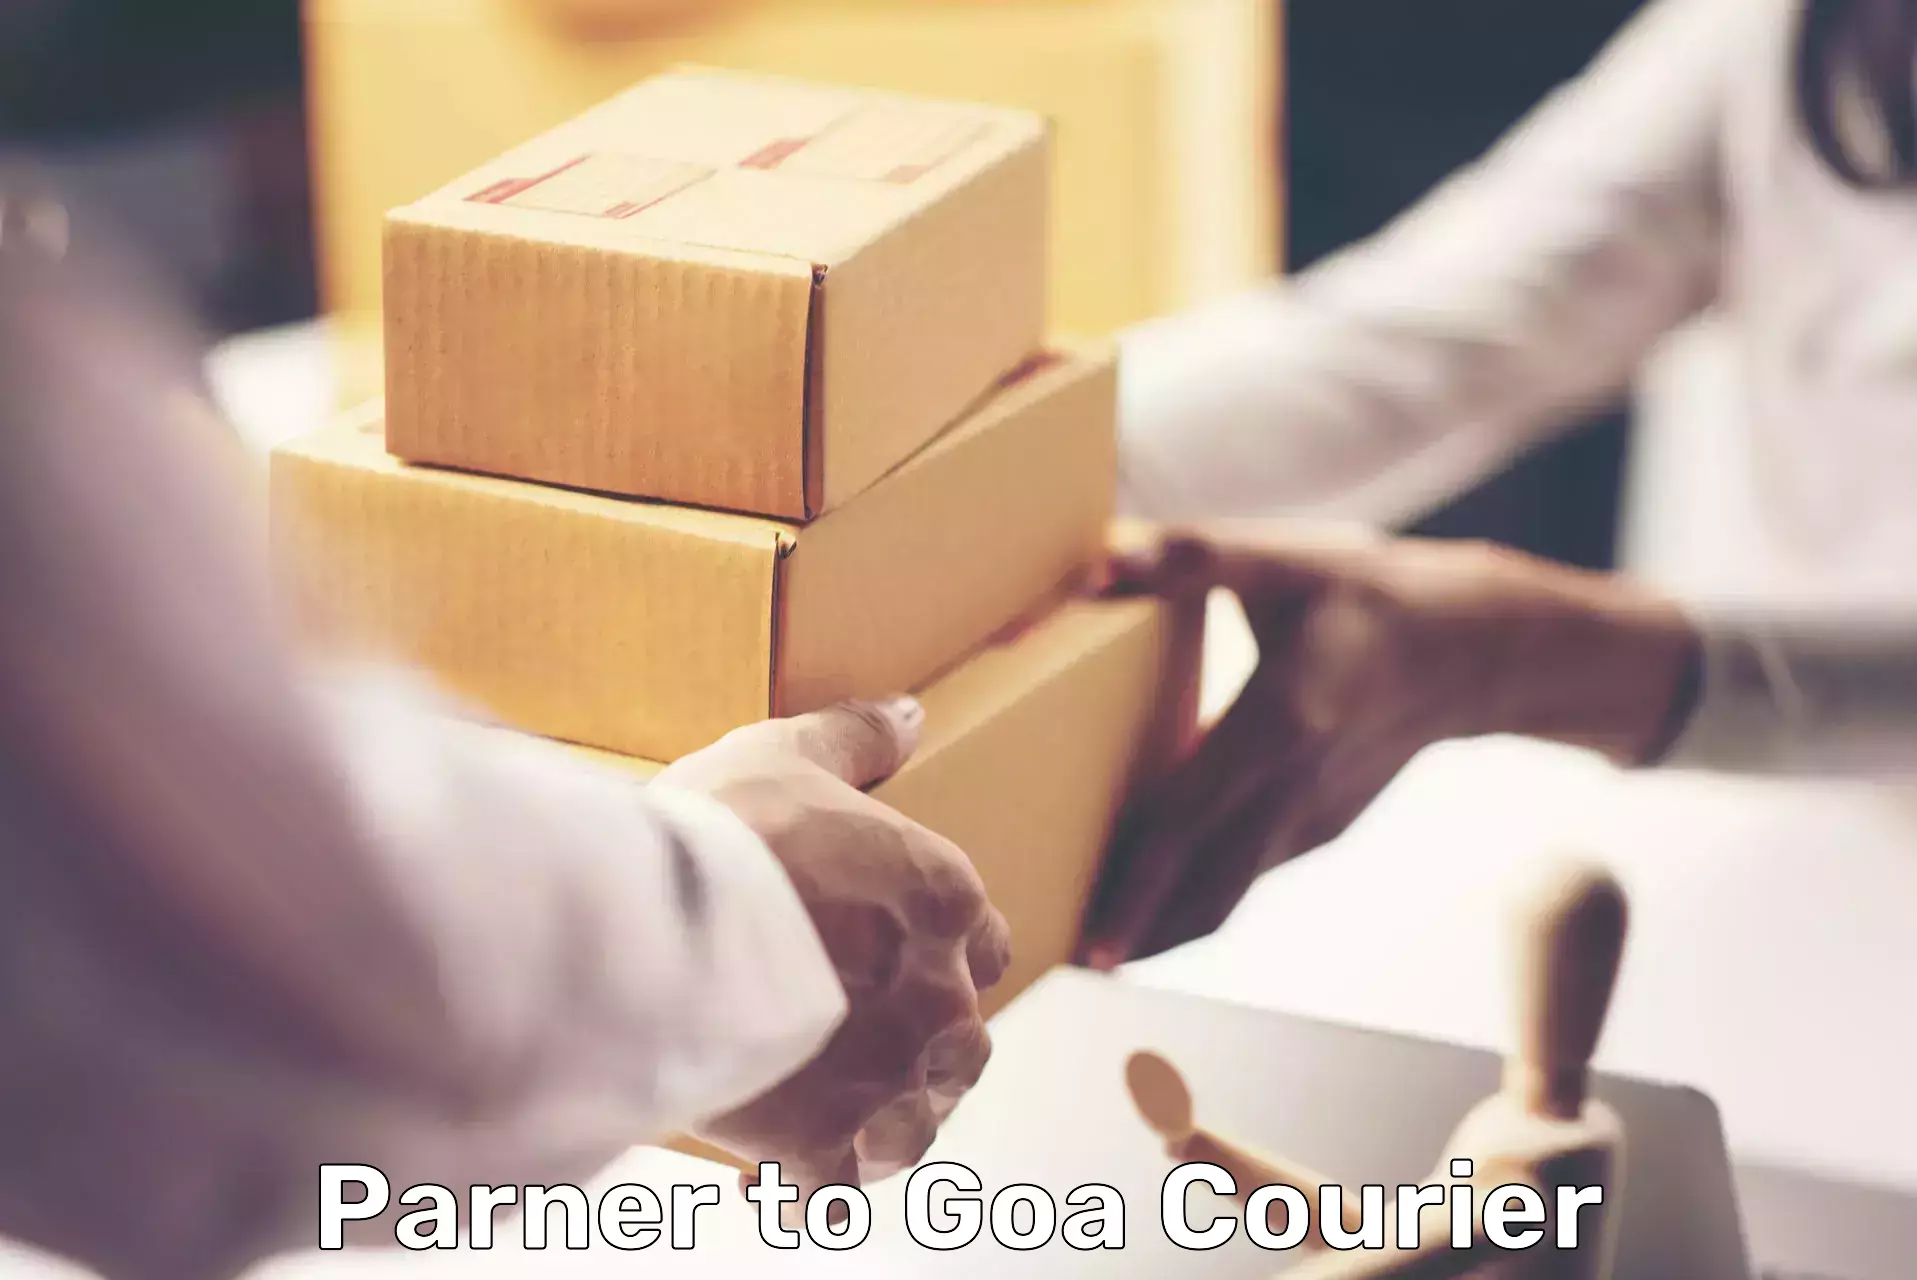 Express delivery capabilities Parner to Goa University